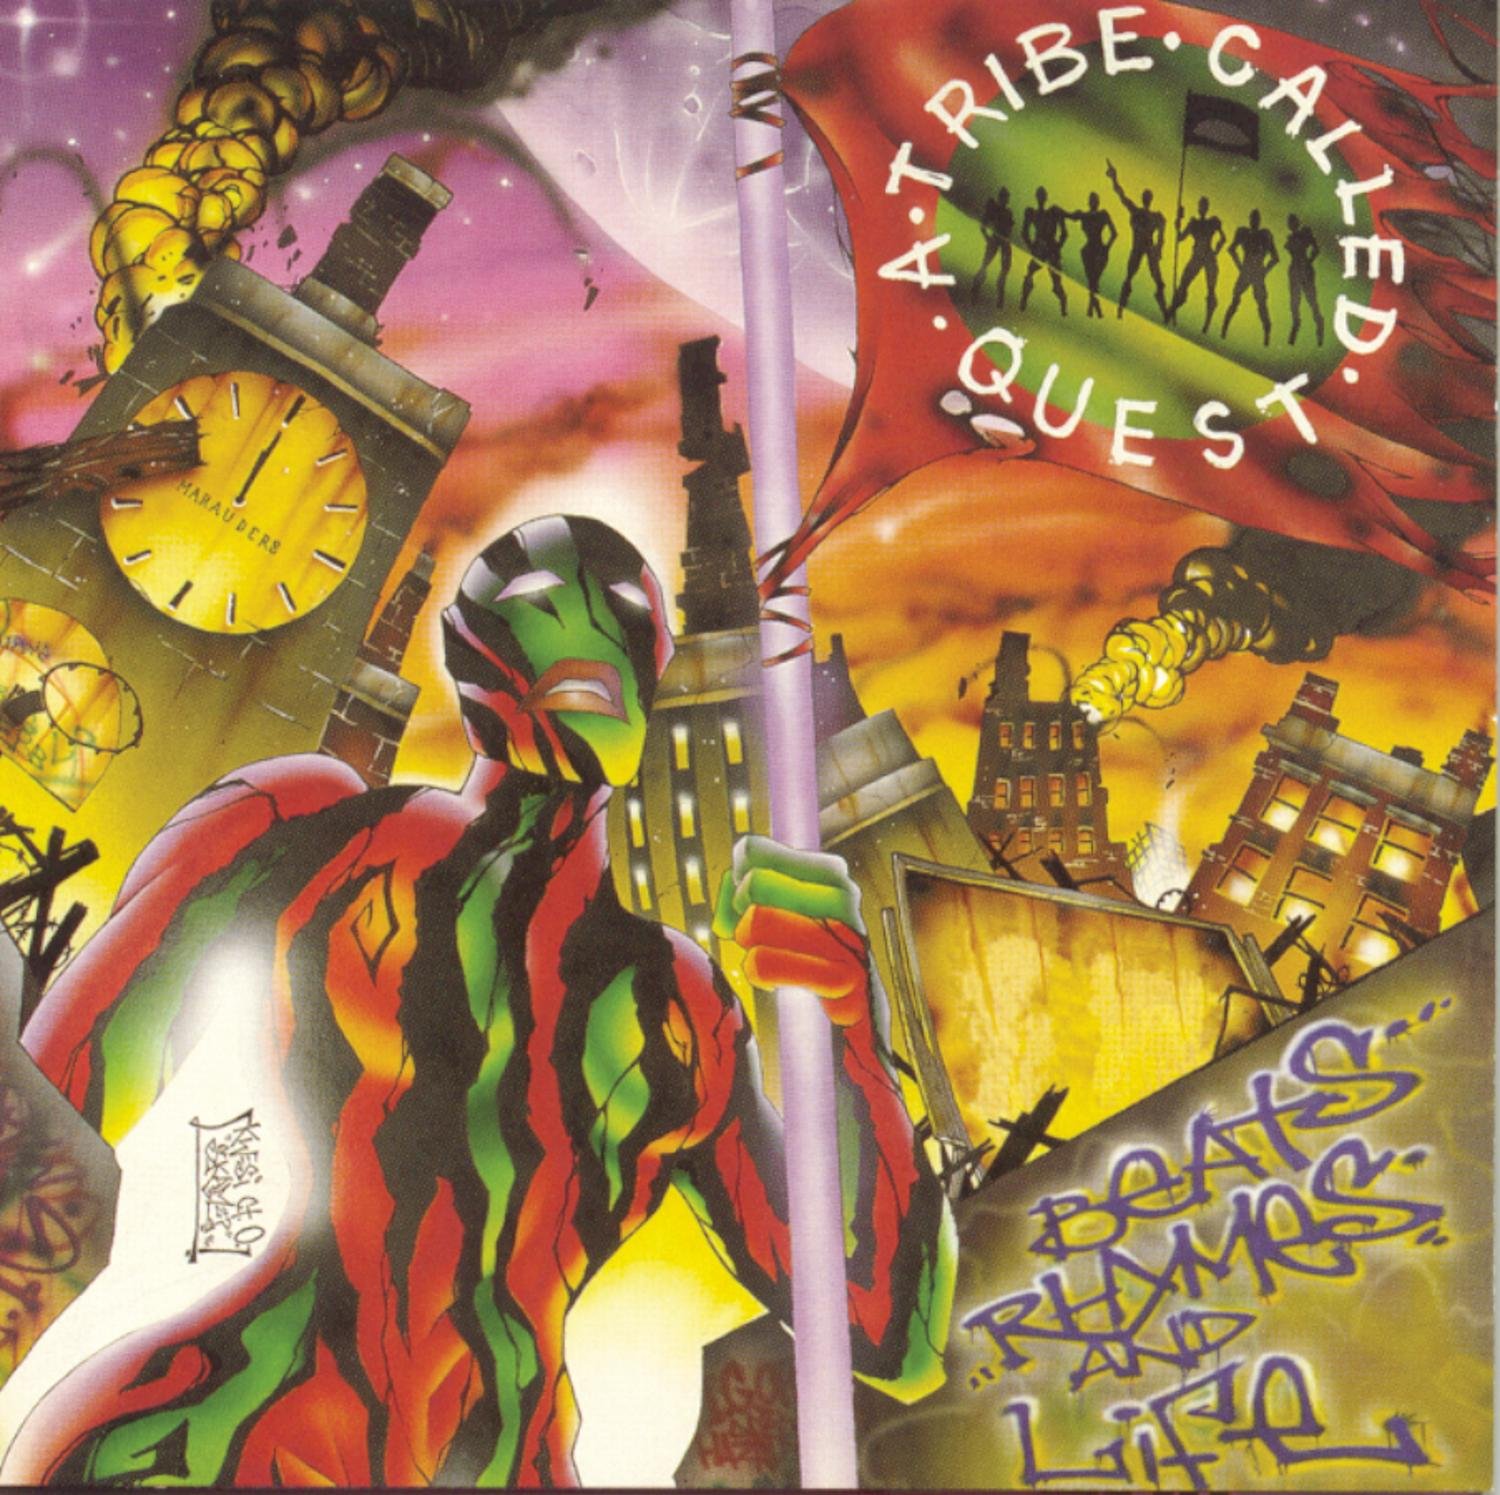 The cover for A Tribe Called Quest's fourth LP, "Beats, Rhymes and Life" features a highly dystopian view of society. 